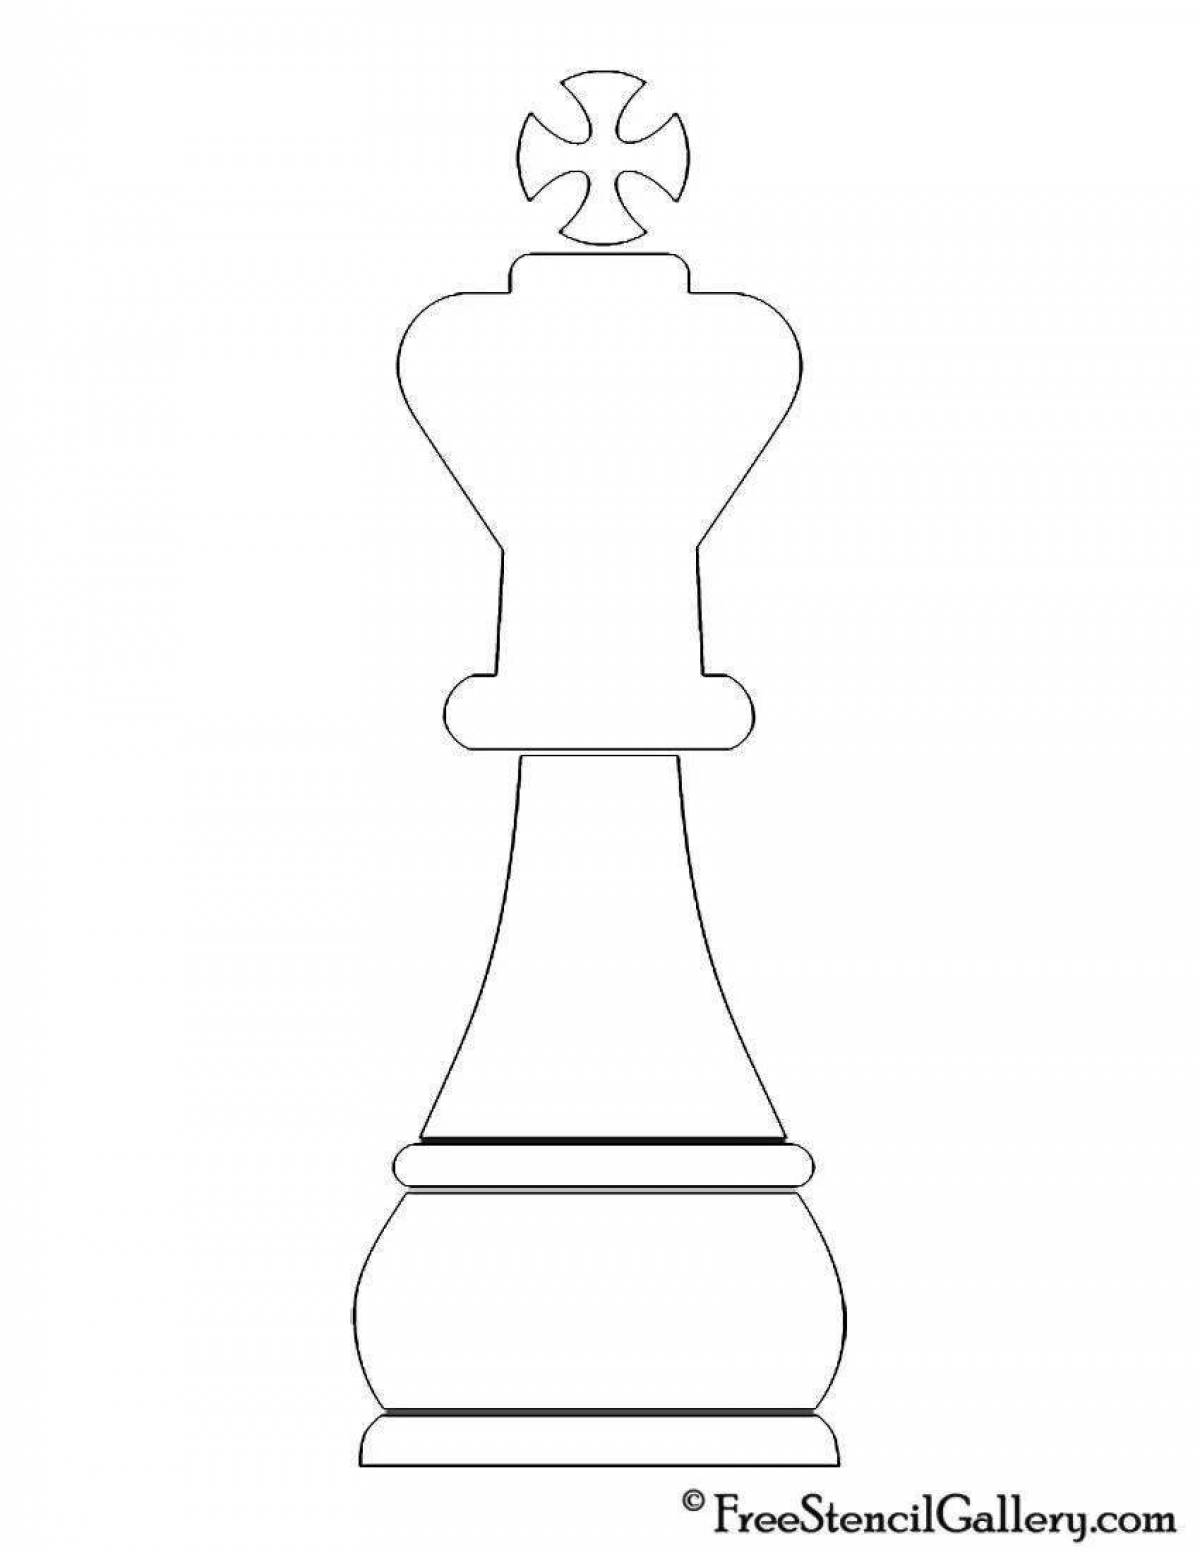 Exquisite coloring of chess pieces